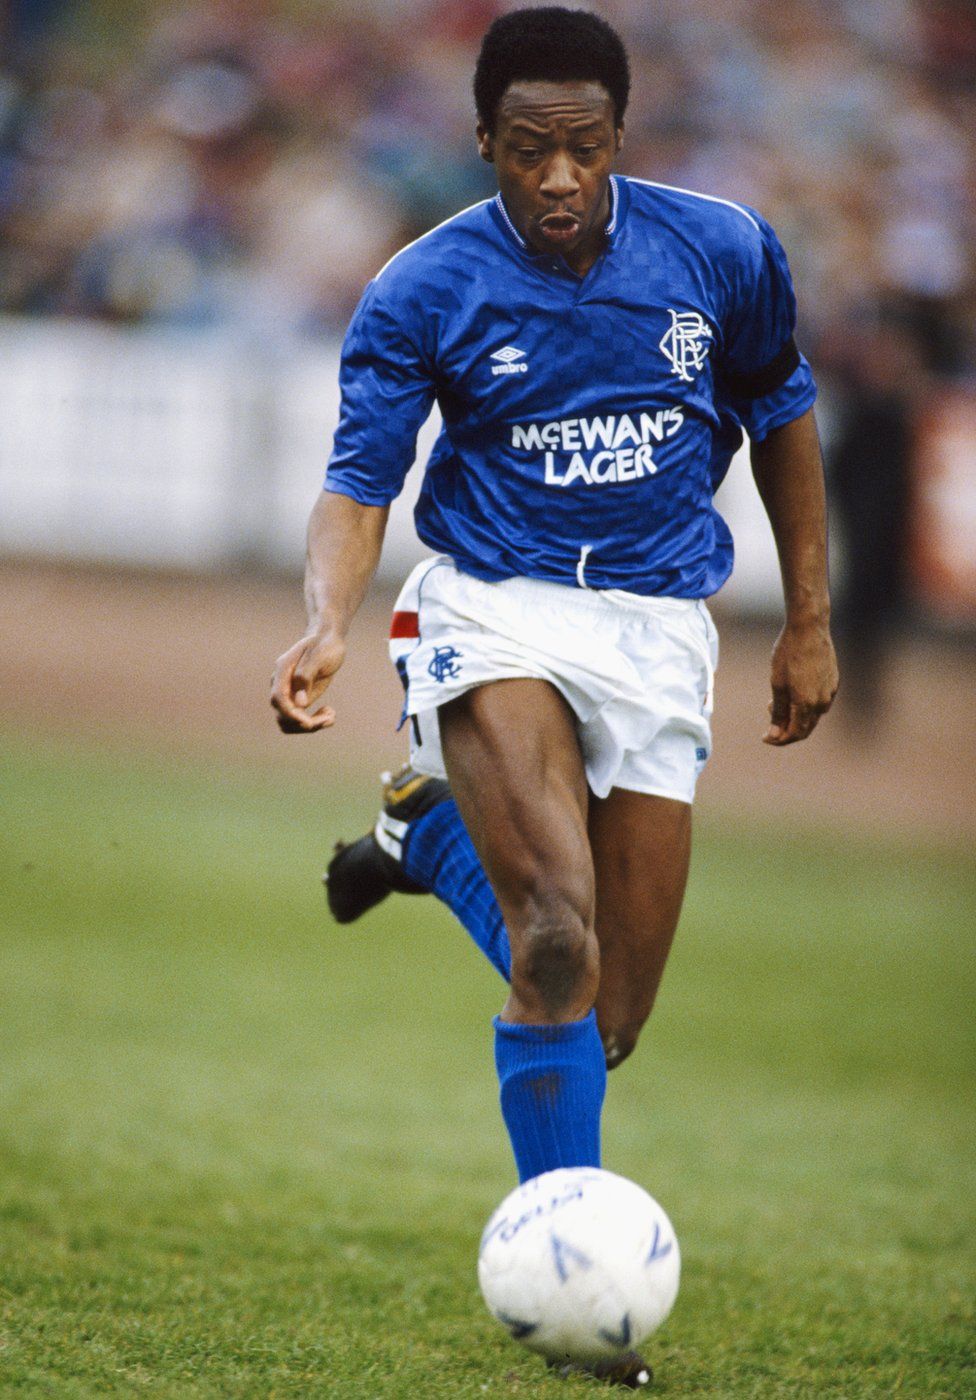 Rangers winger Mark Walters in action during a Scottish Premier match on April 22, 1989 in Glasgow